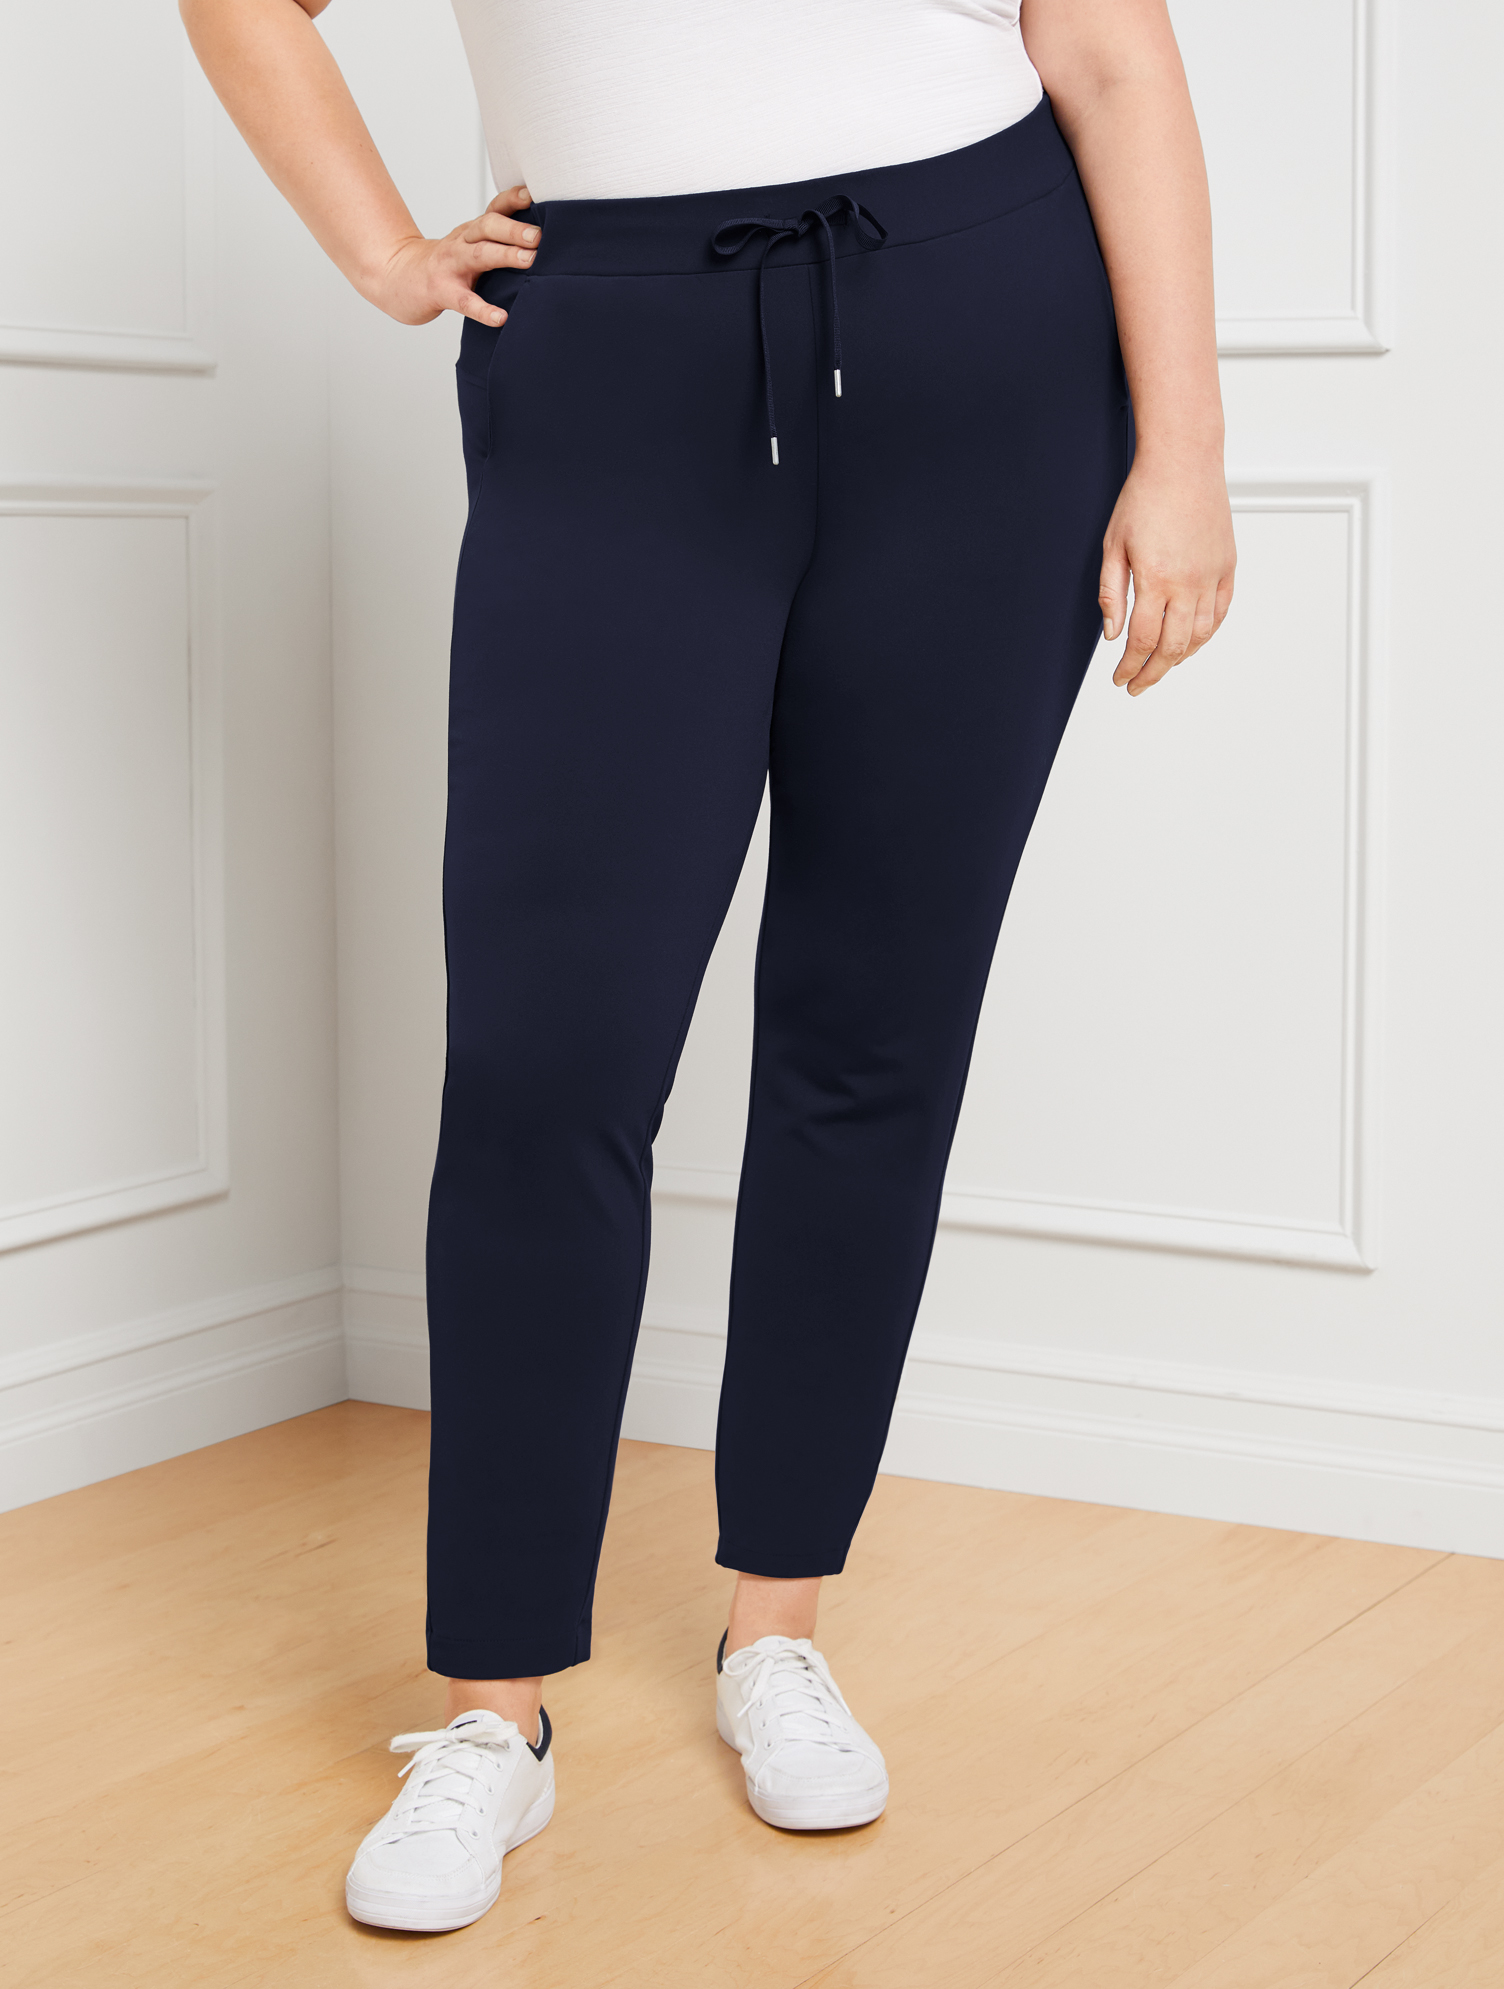 Talbots Out & About Stretch Jogger Pants - Blue - 2x